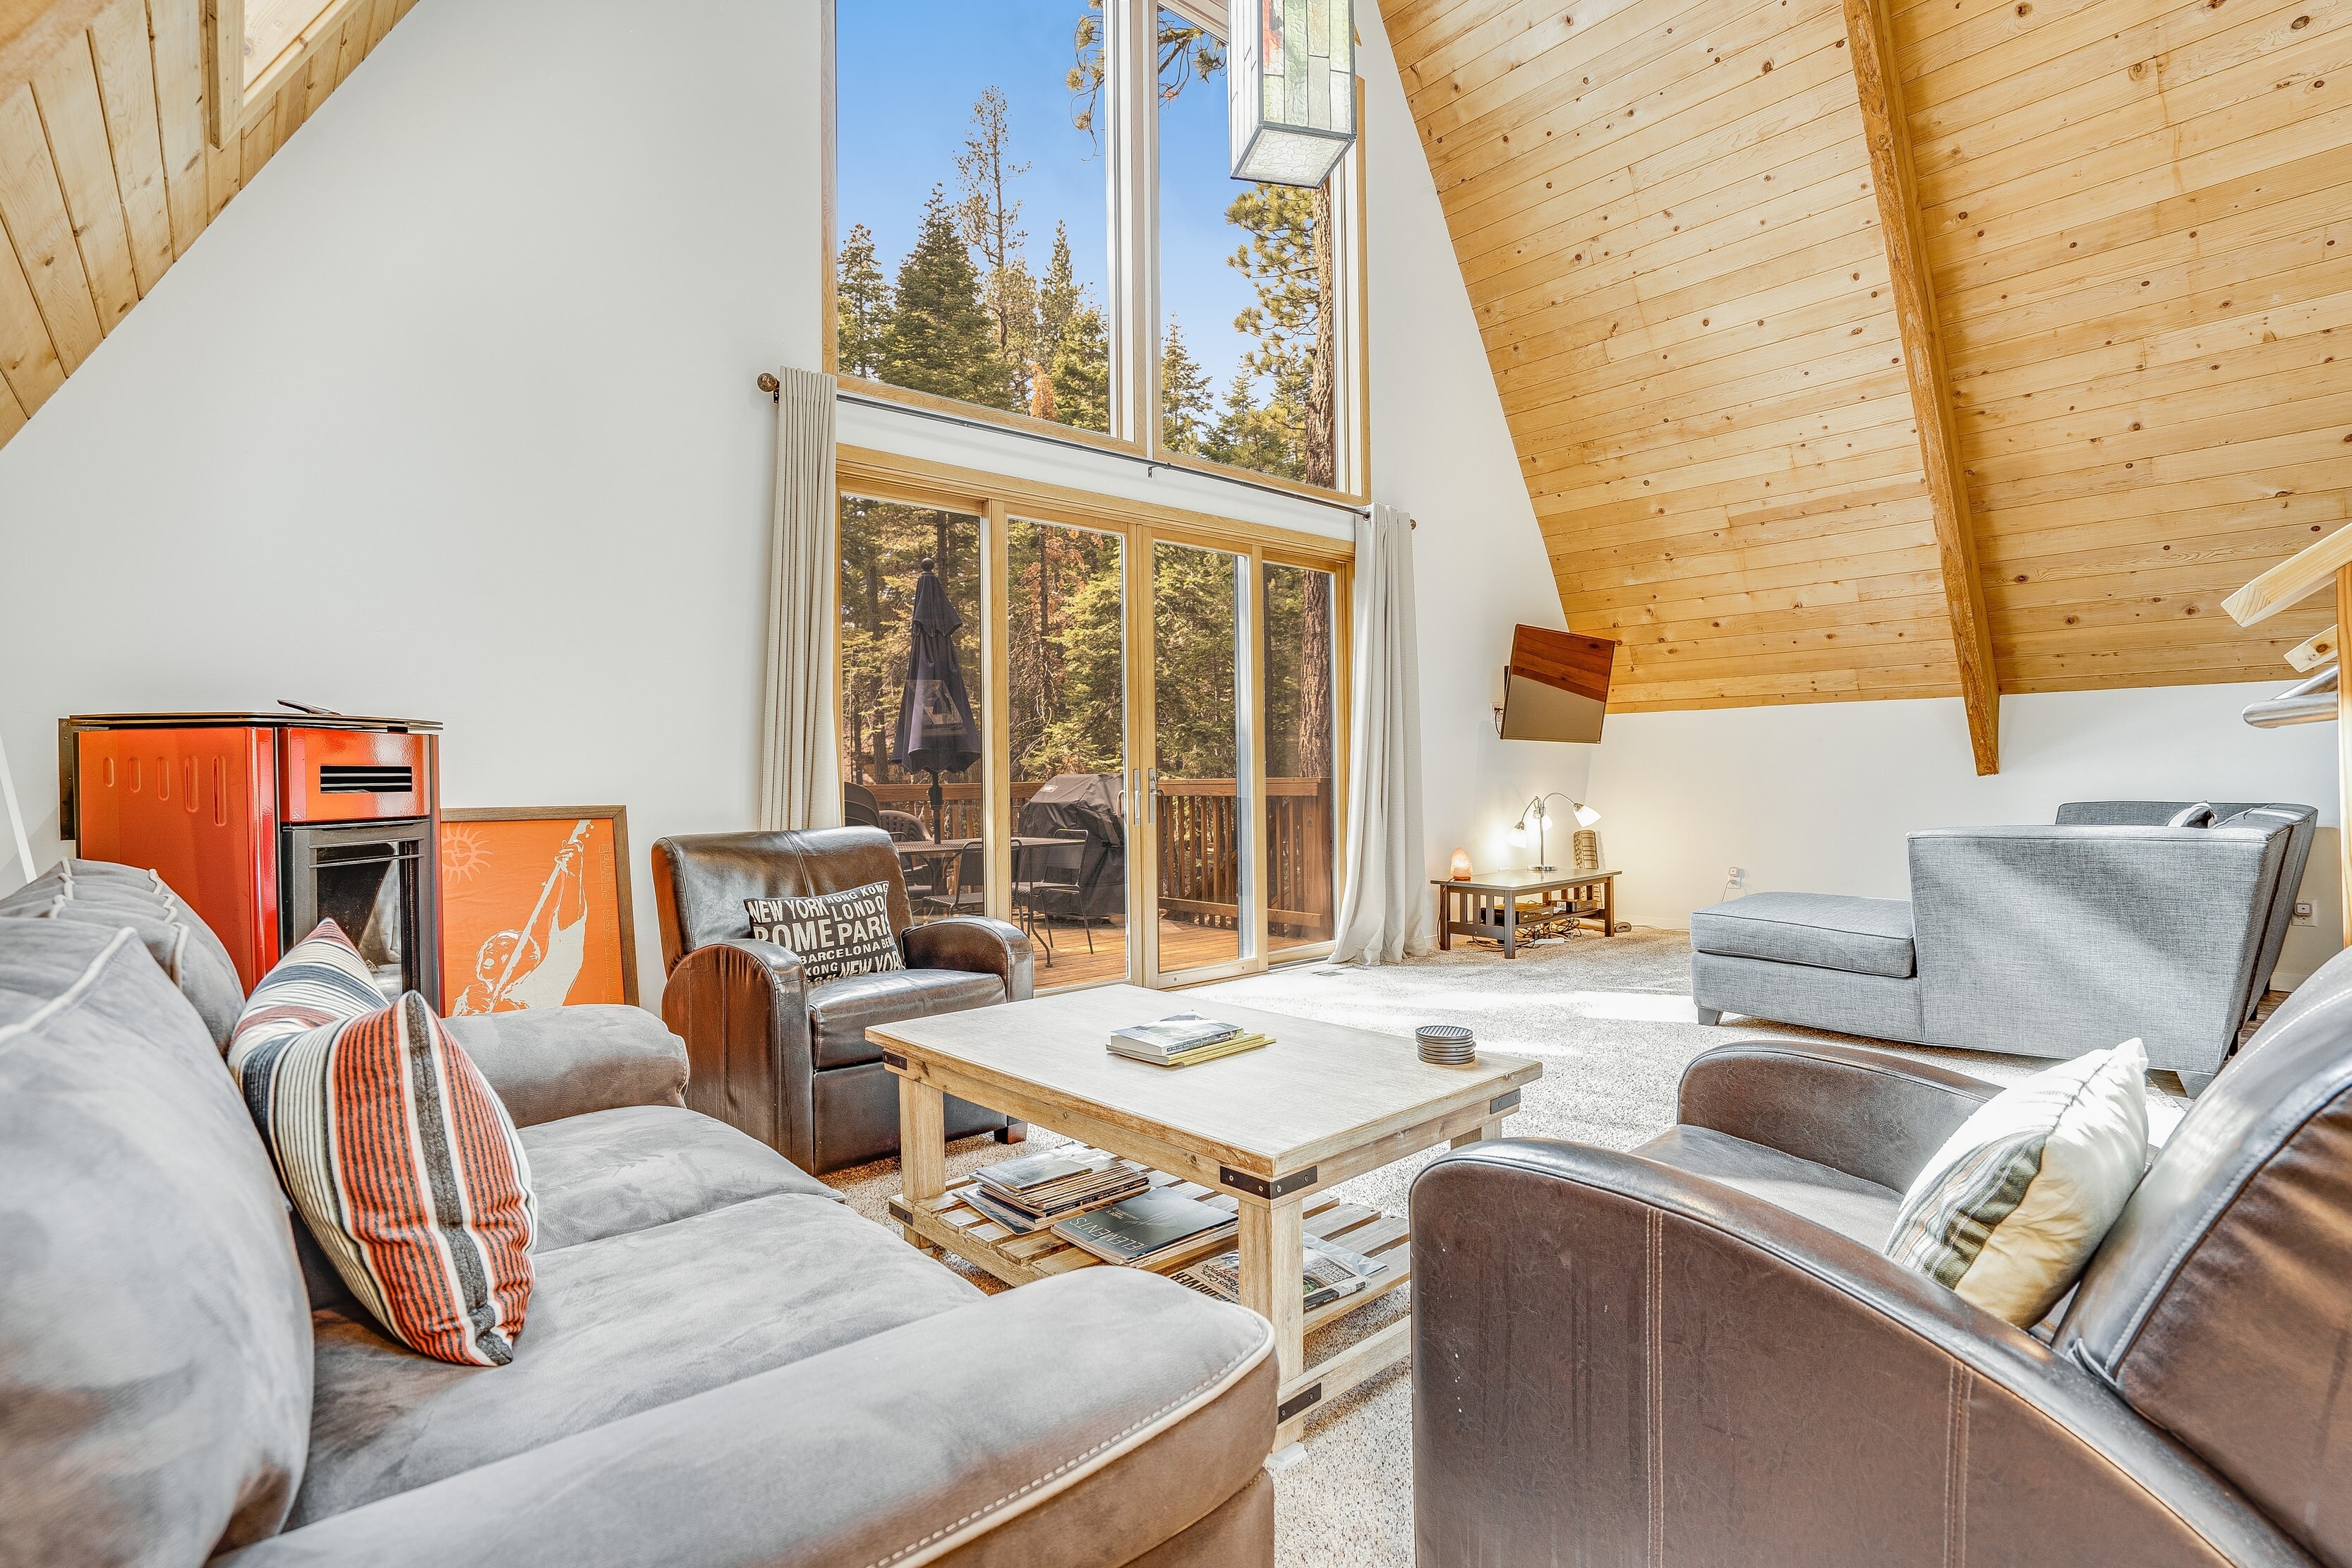 Living room features large windows for plenty of natural light.